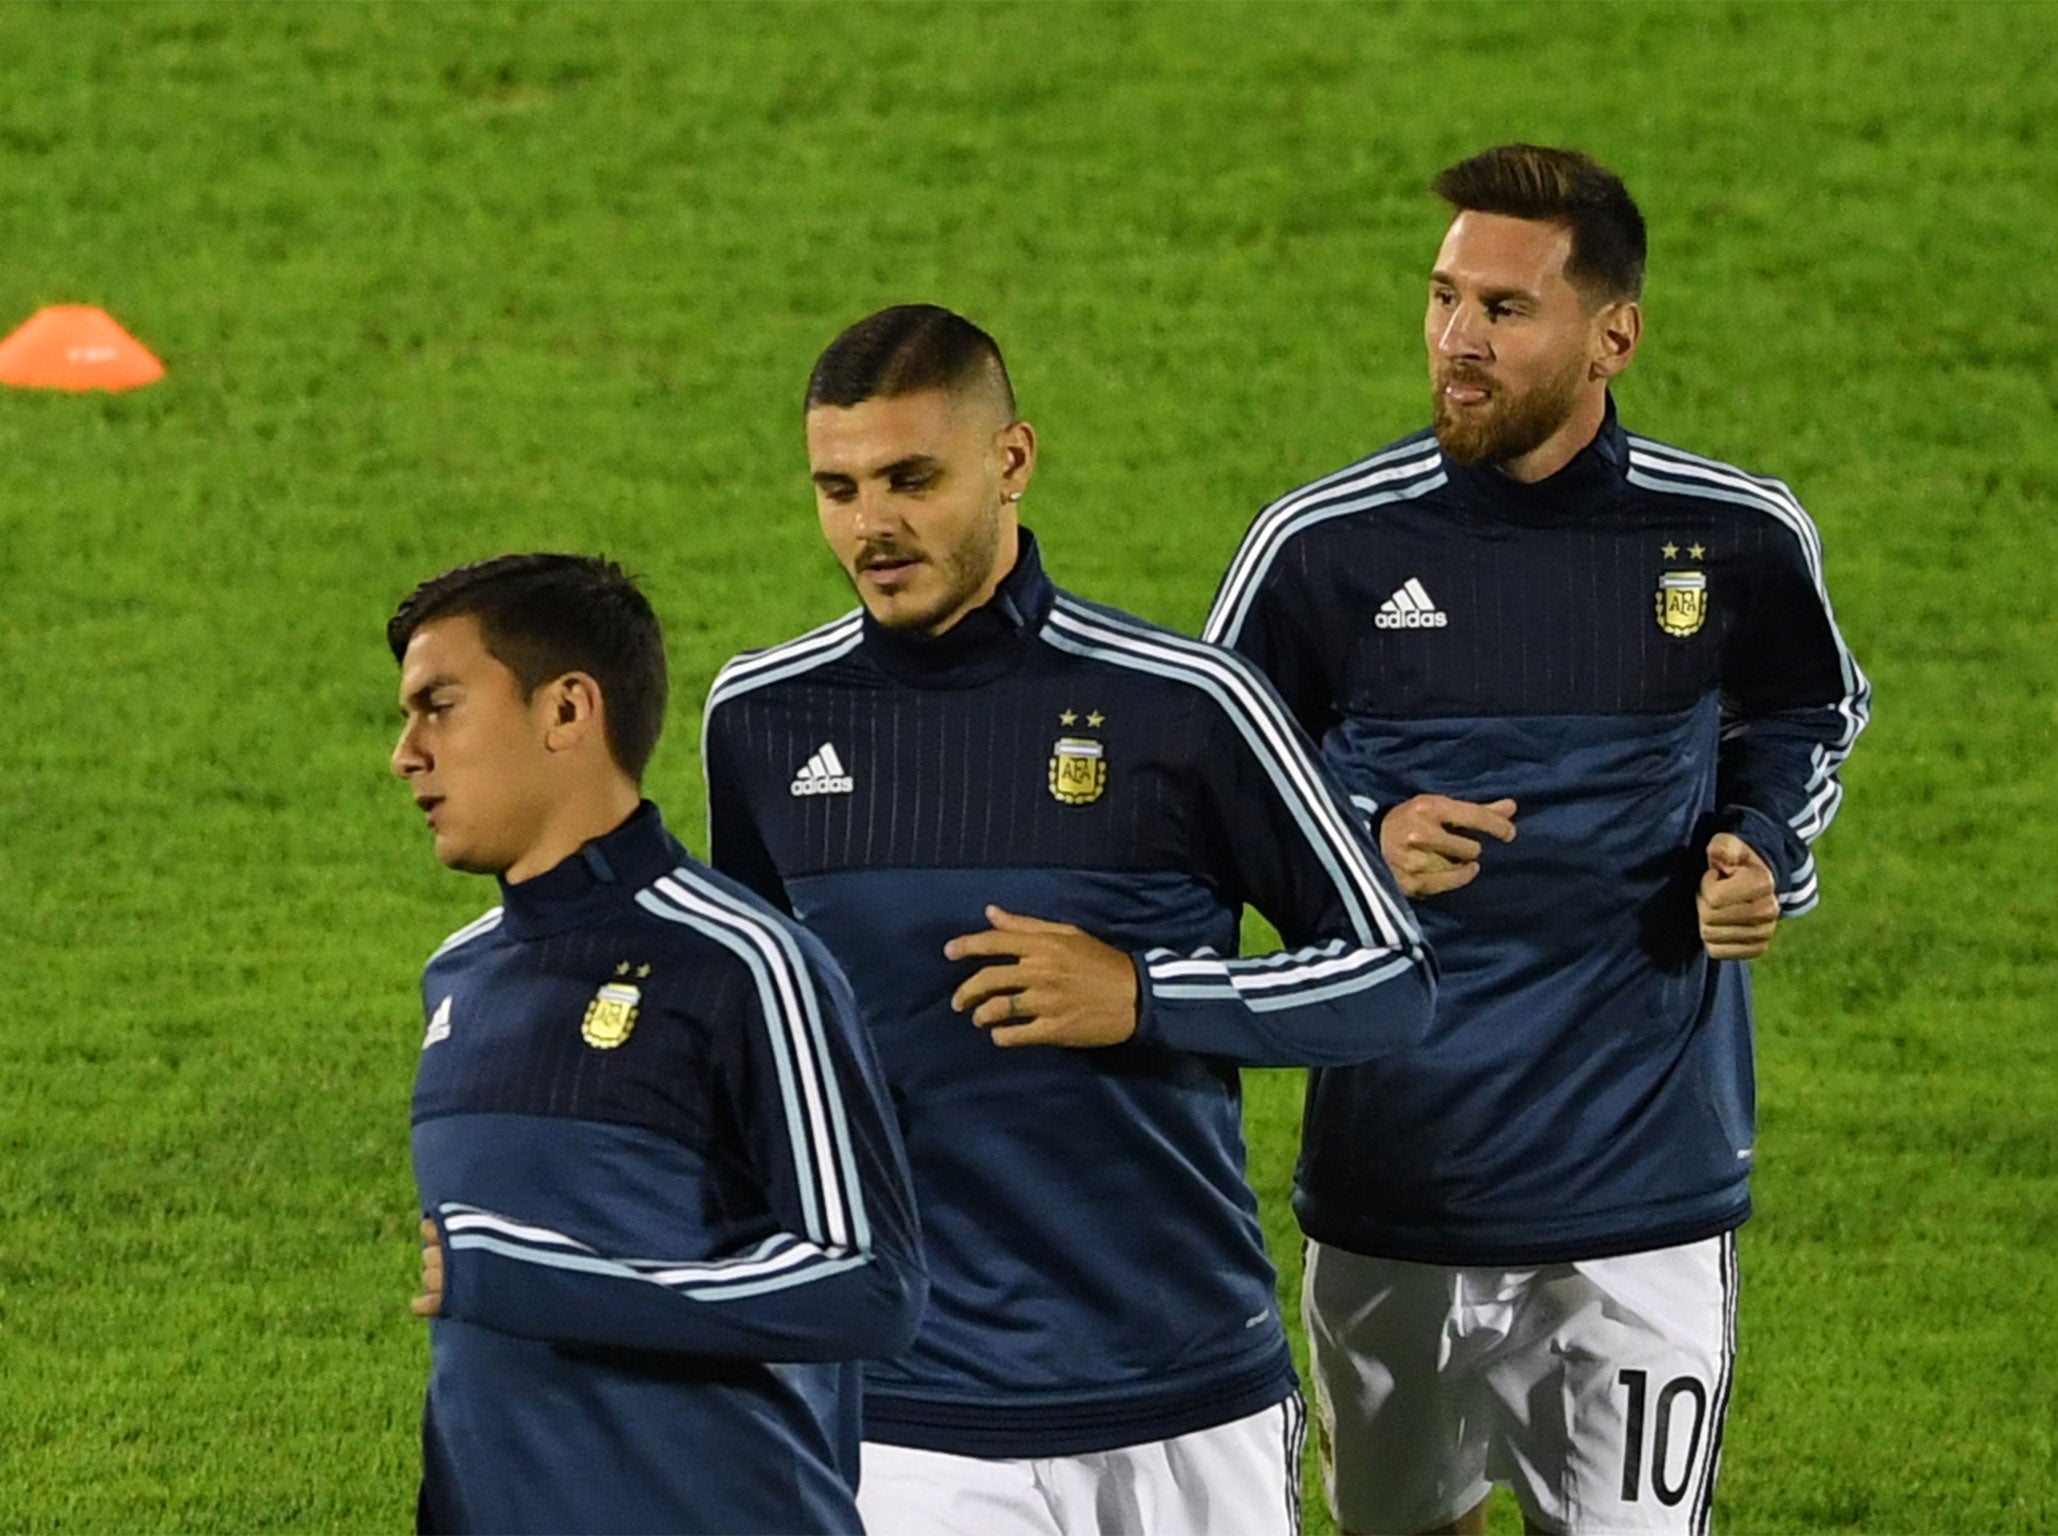 Dos out of tres: Dybala, Icardi and Messi won't all go to the World Cup